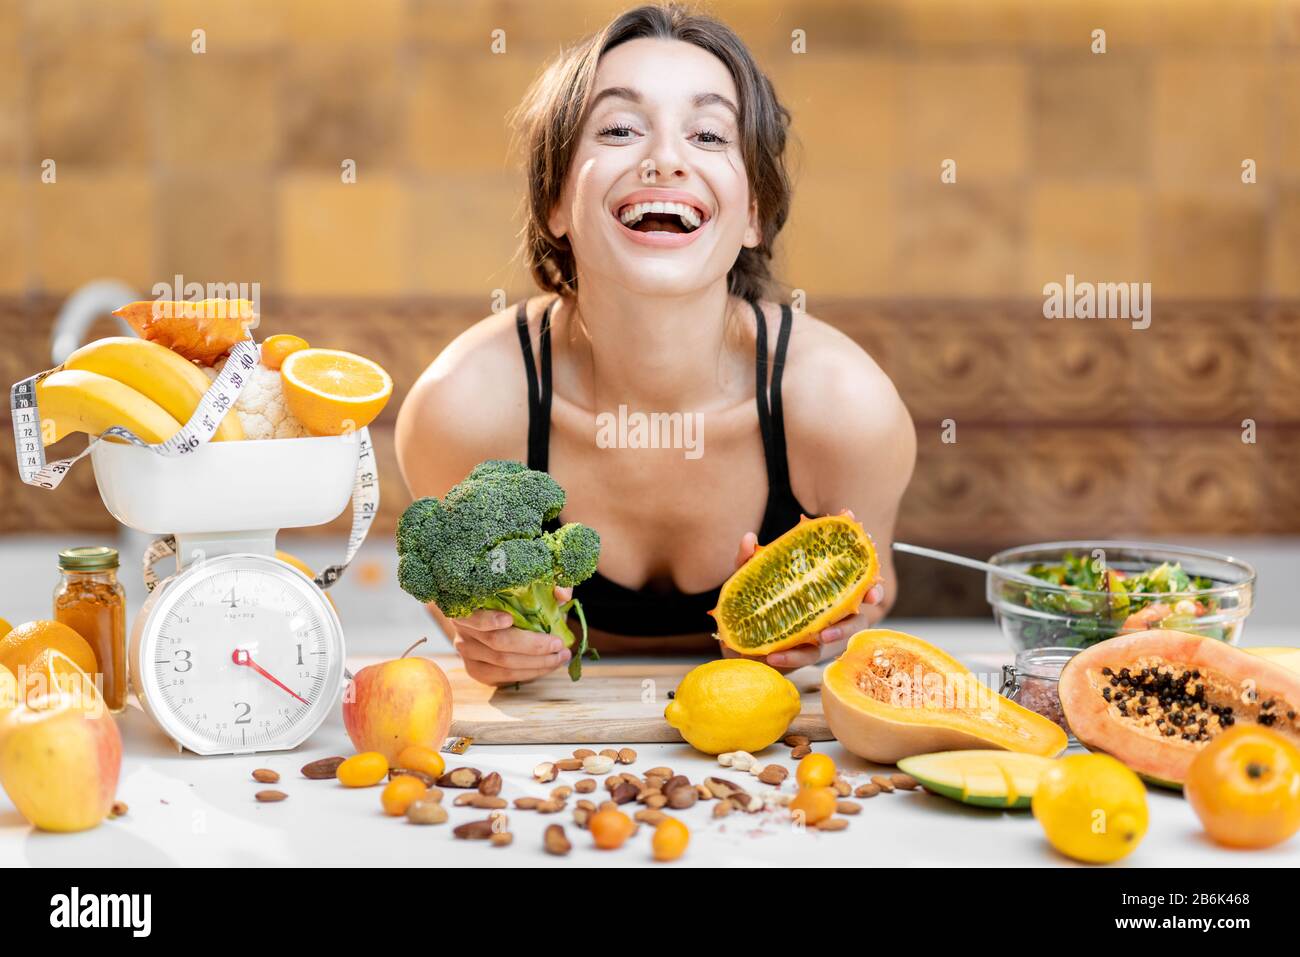 Portrait of a joyful sports woman with lots of healthy fresh food on the kitchen. Concept of losing weight, sports and healthy eating Stock Photo